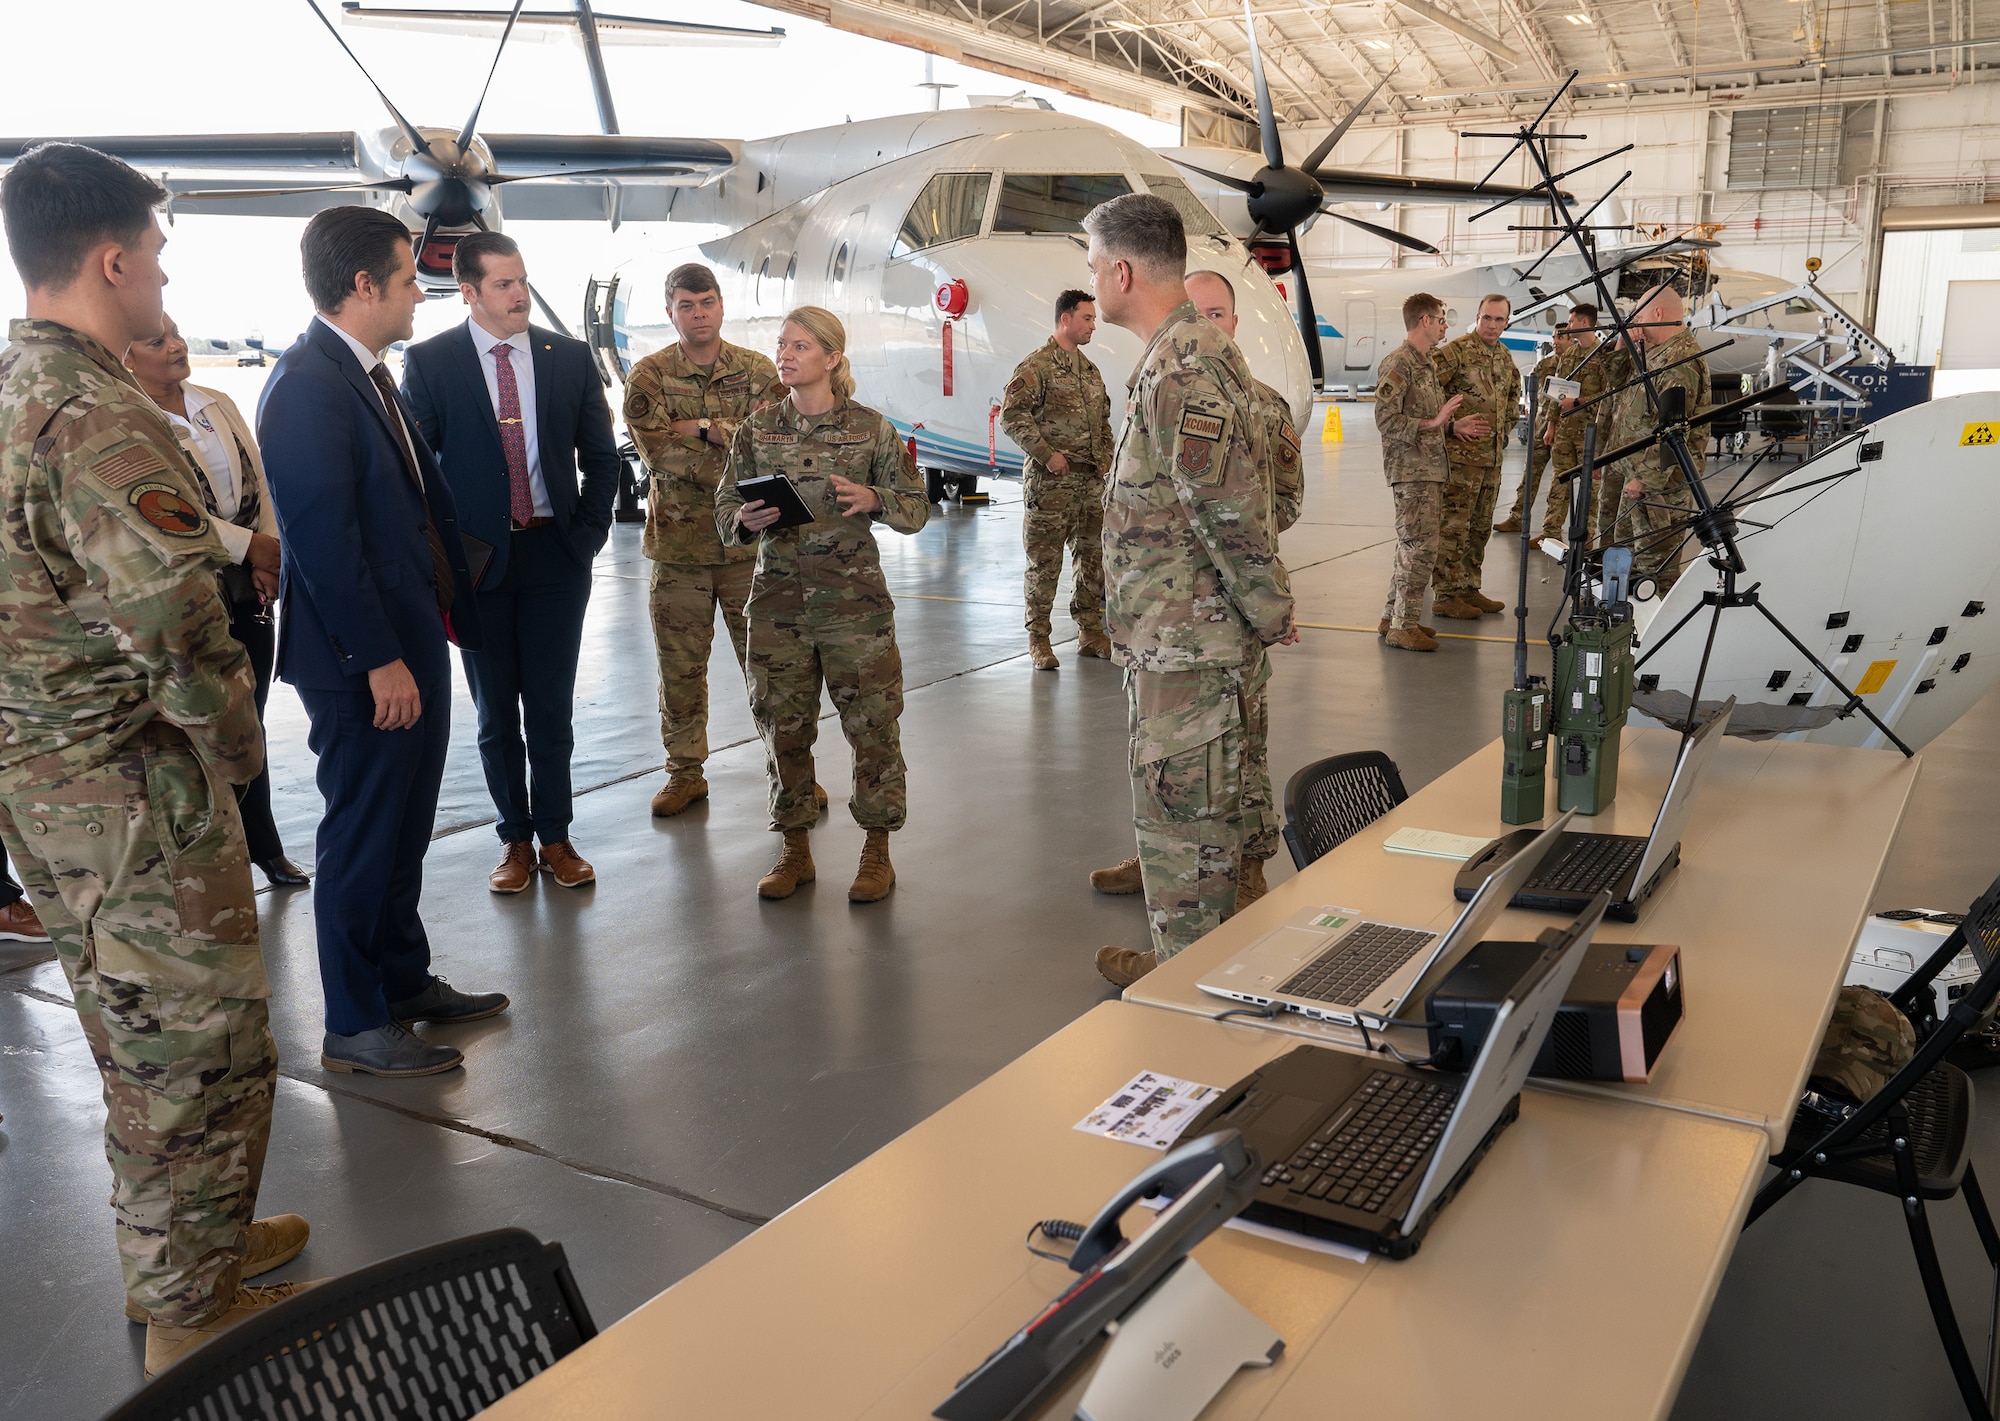 In the foreground is tactical communications equipment displayed on a table and behind it are senior leaders talking in a C-146A Wolfhound hangar